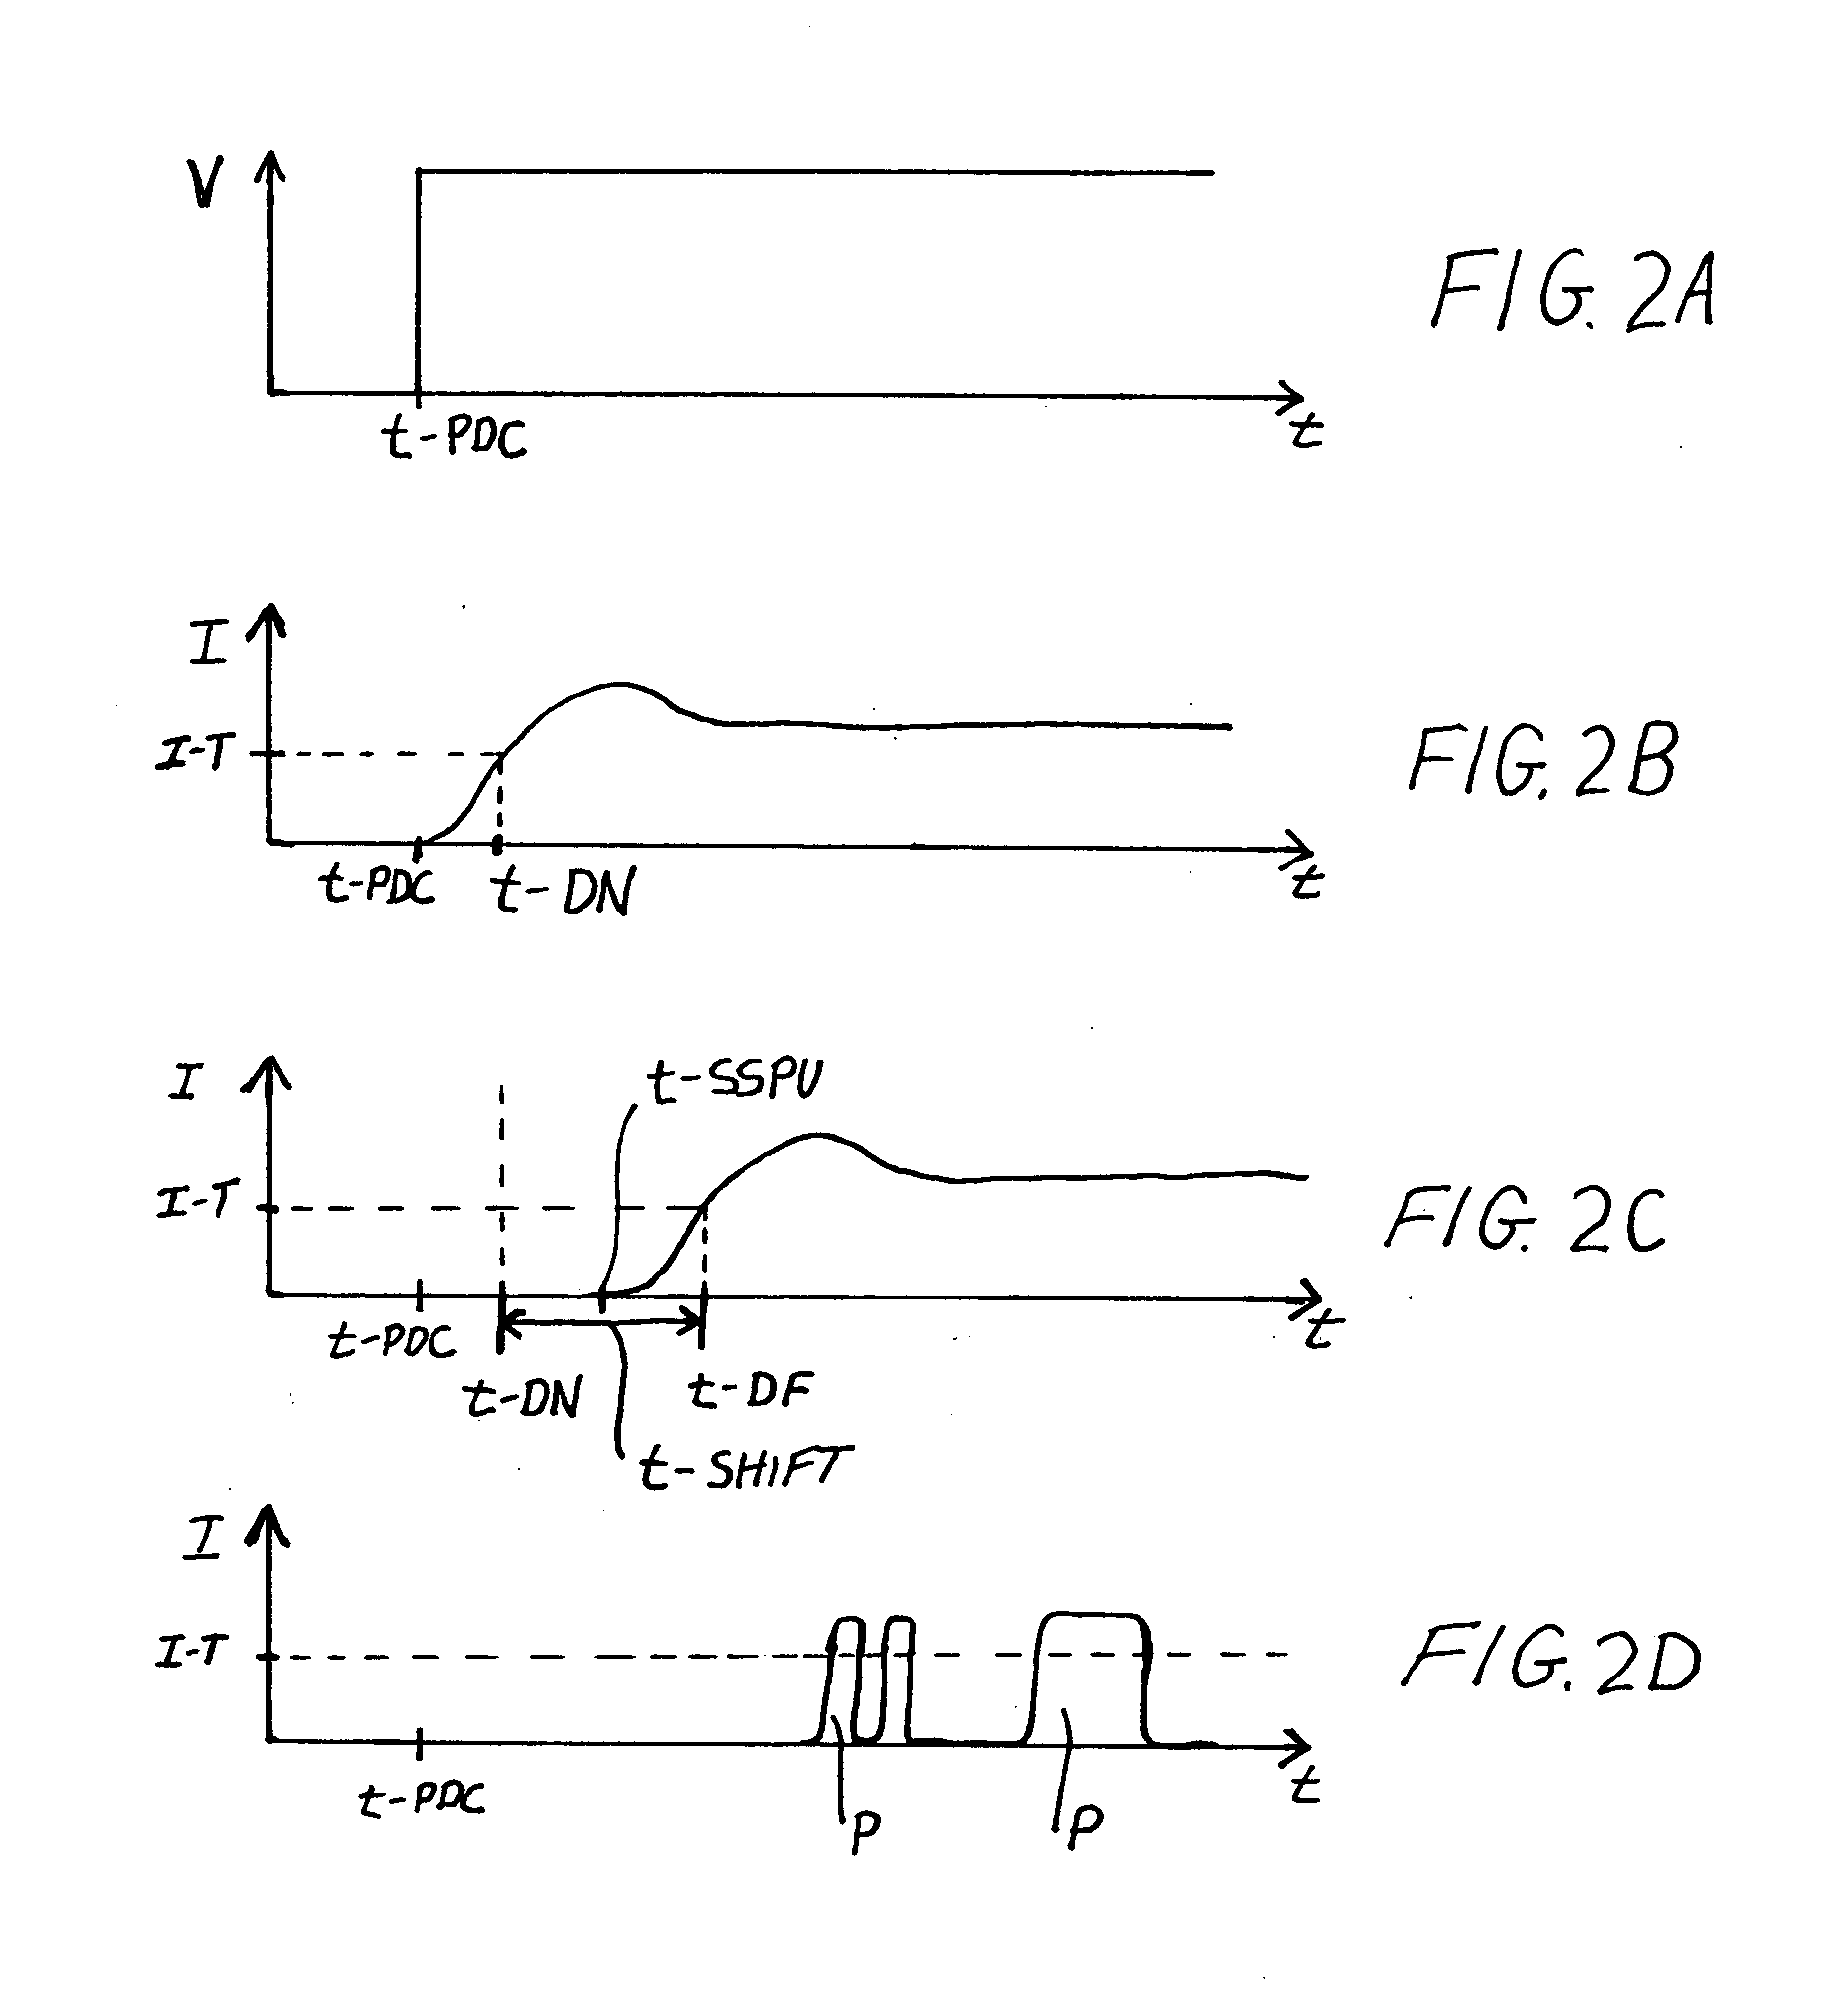 System and method for detecting faults in an aircraft electrical power system